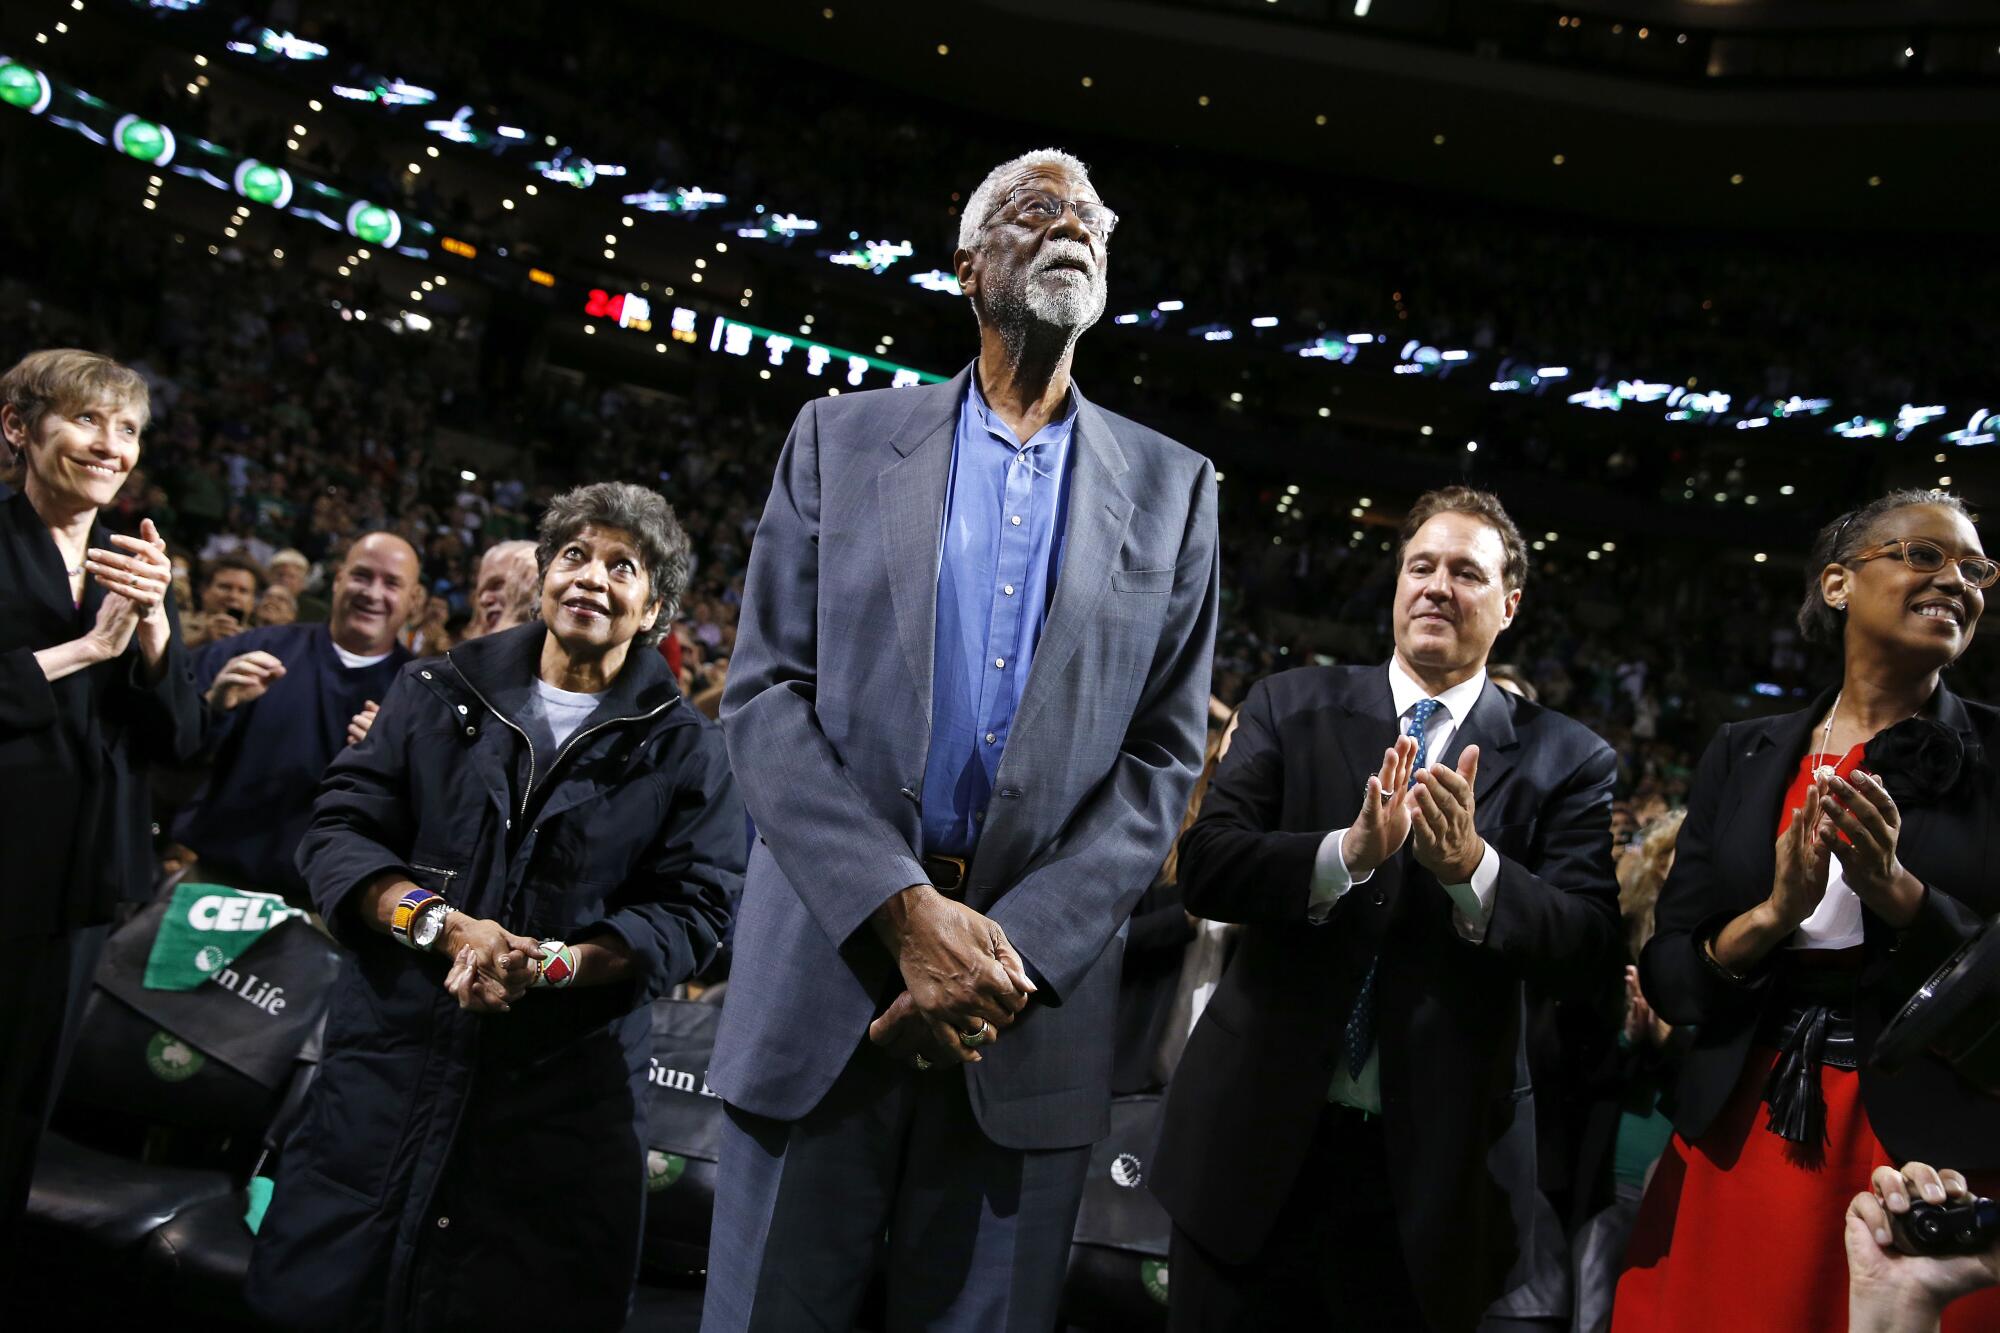 Bill Russell looks up as the people flanking him applaud.